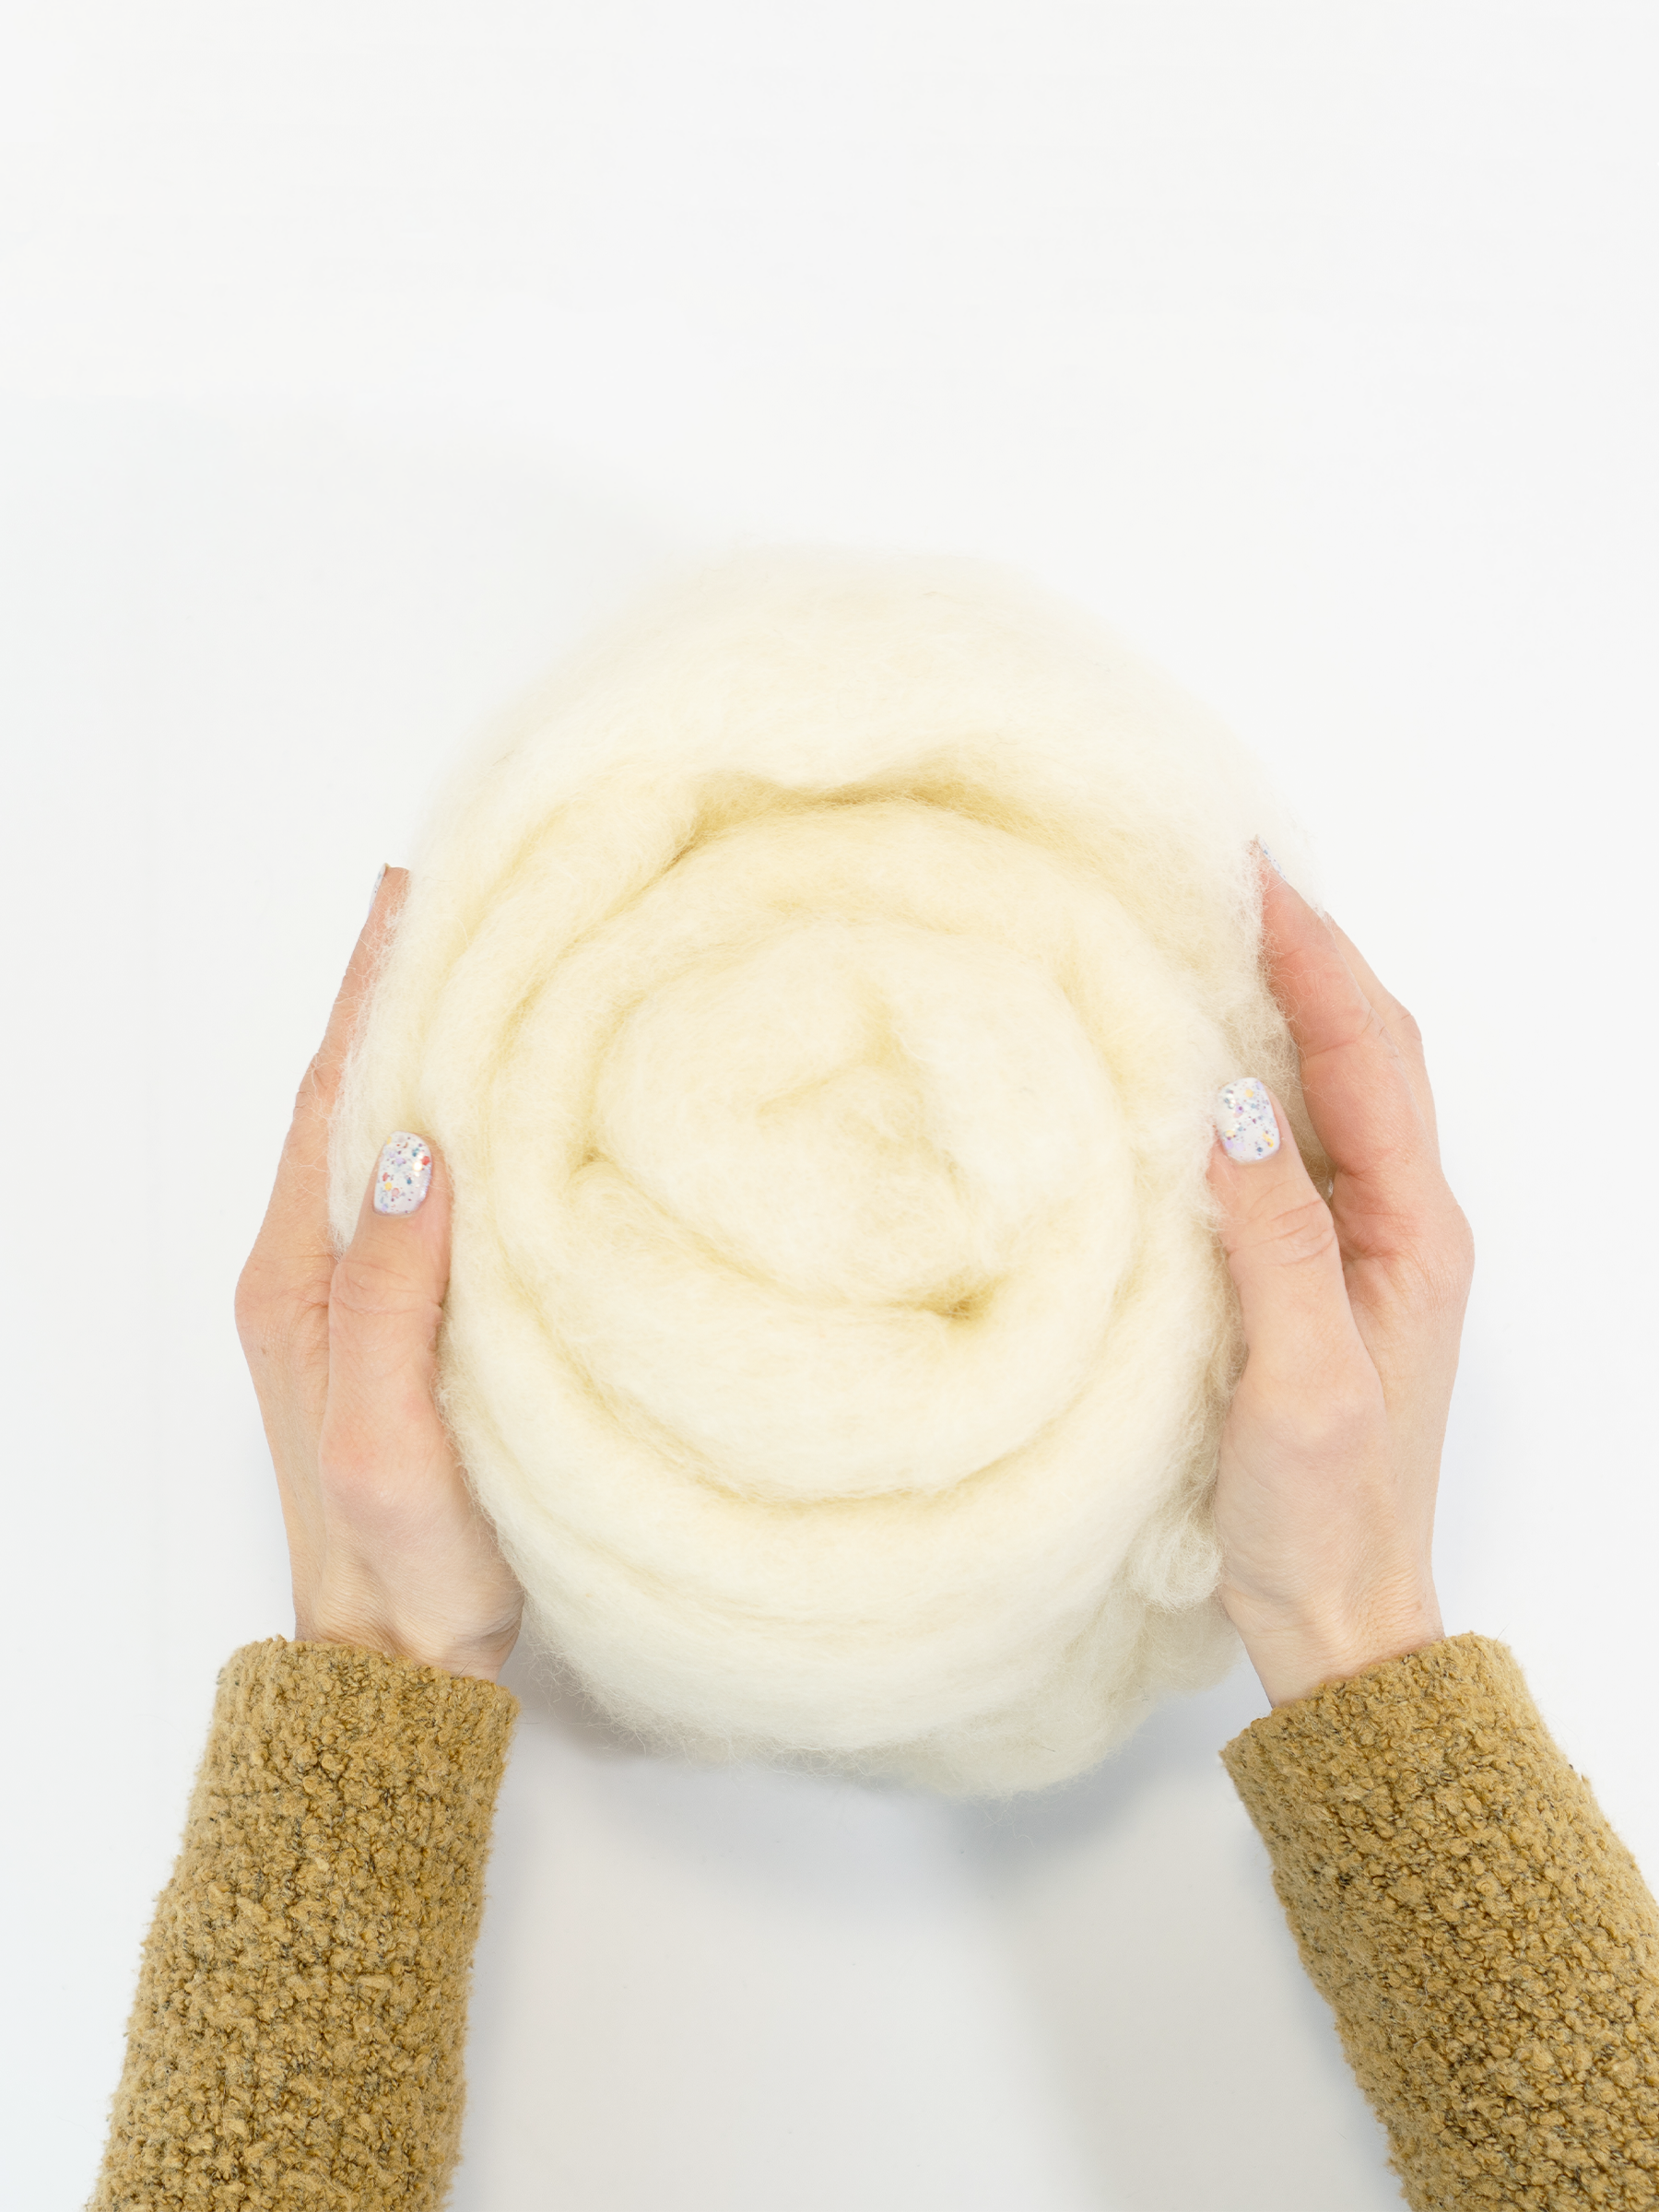 The Funky Felter: Buying Wool Roving and Locks in Bulk and other